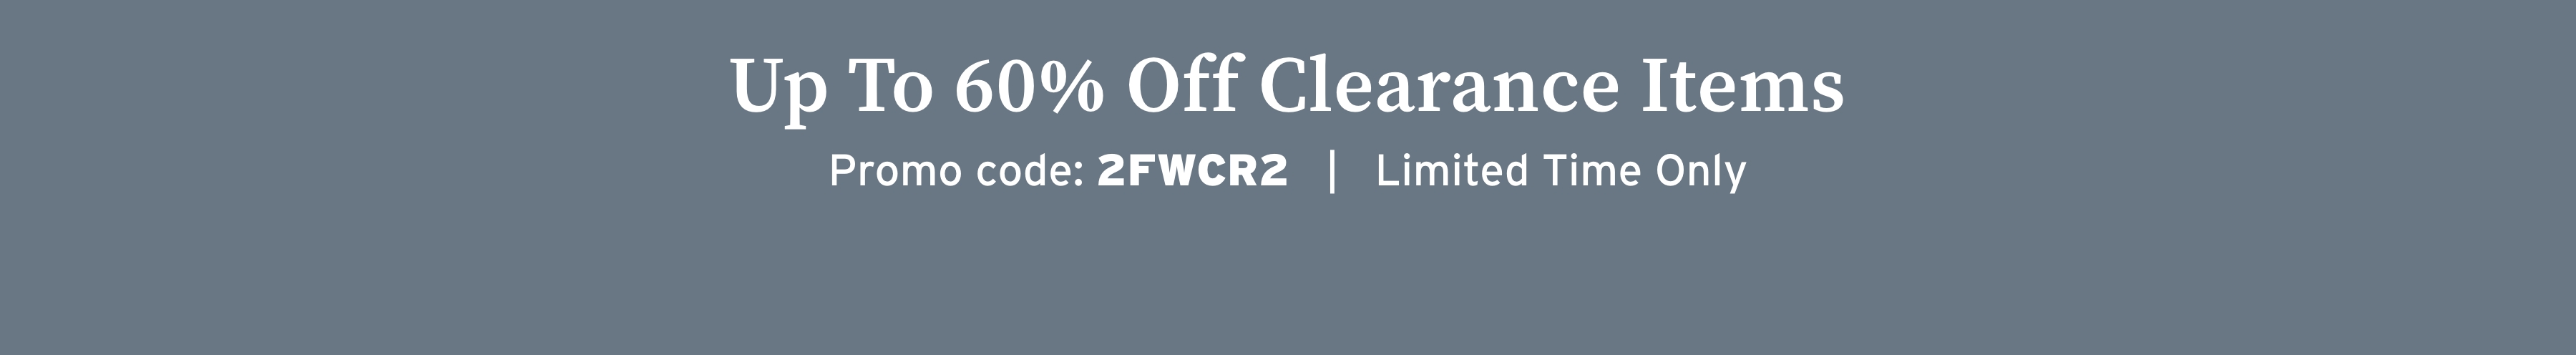 Shop up to 60% off clearance items. Promo code 2FWCR2.